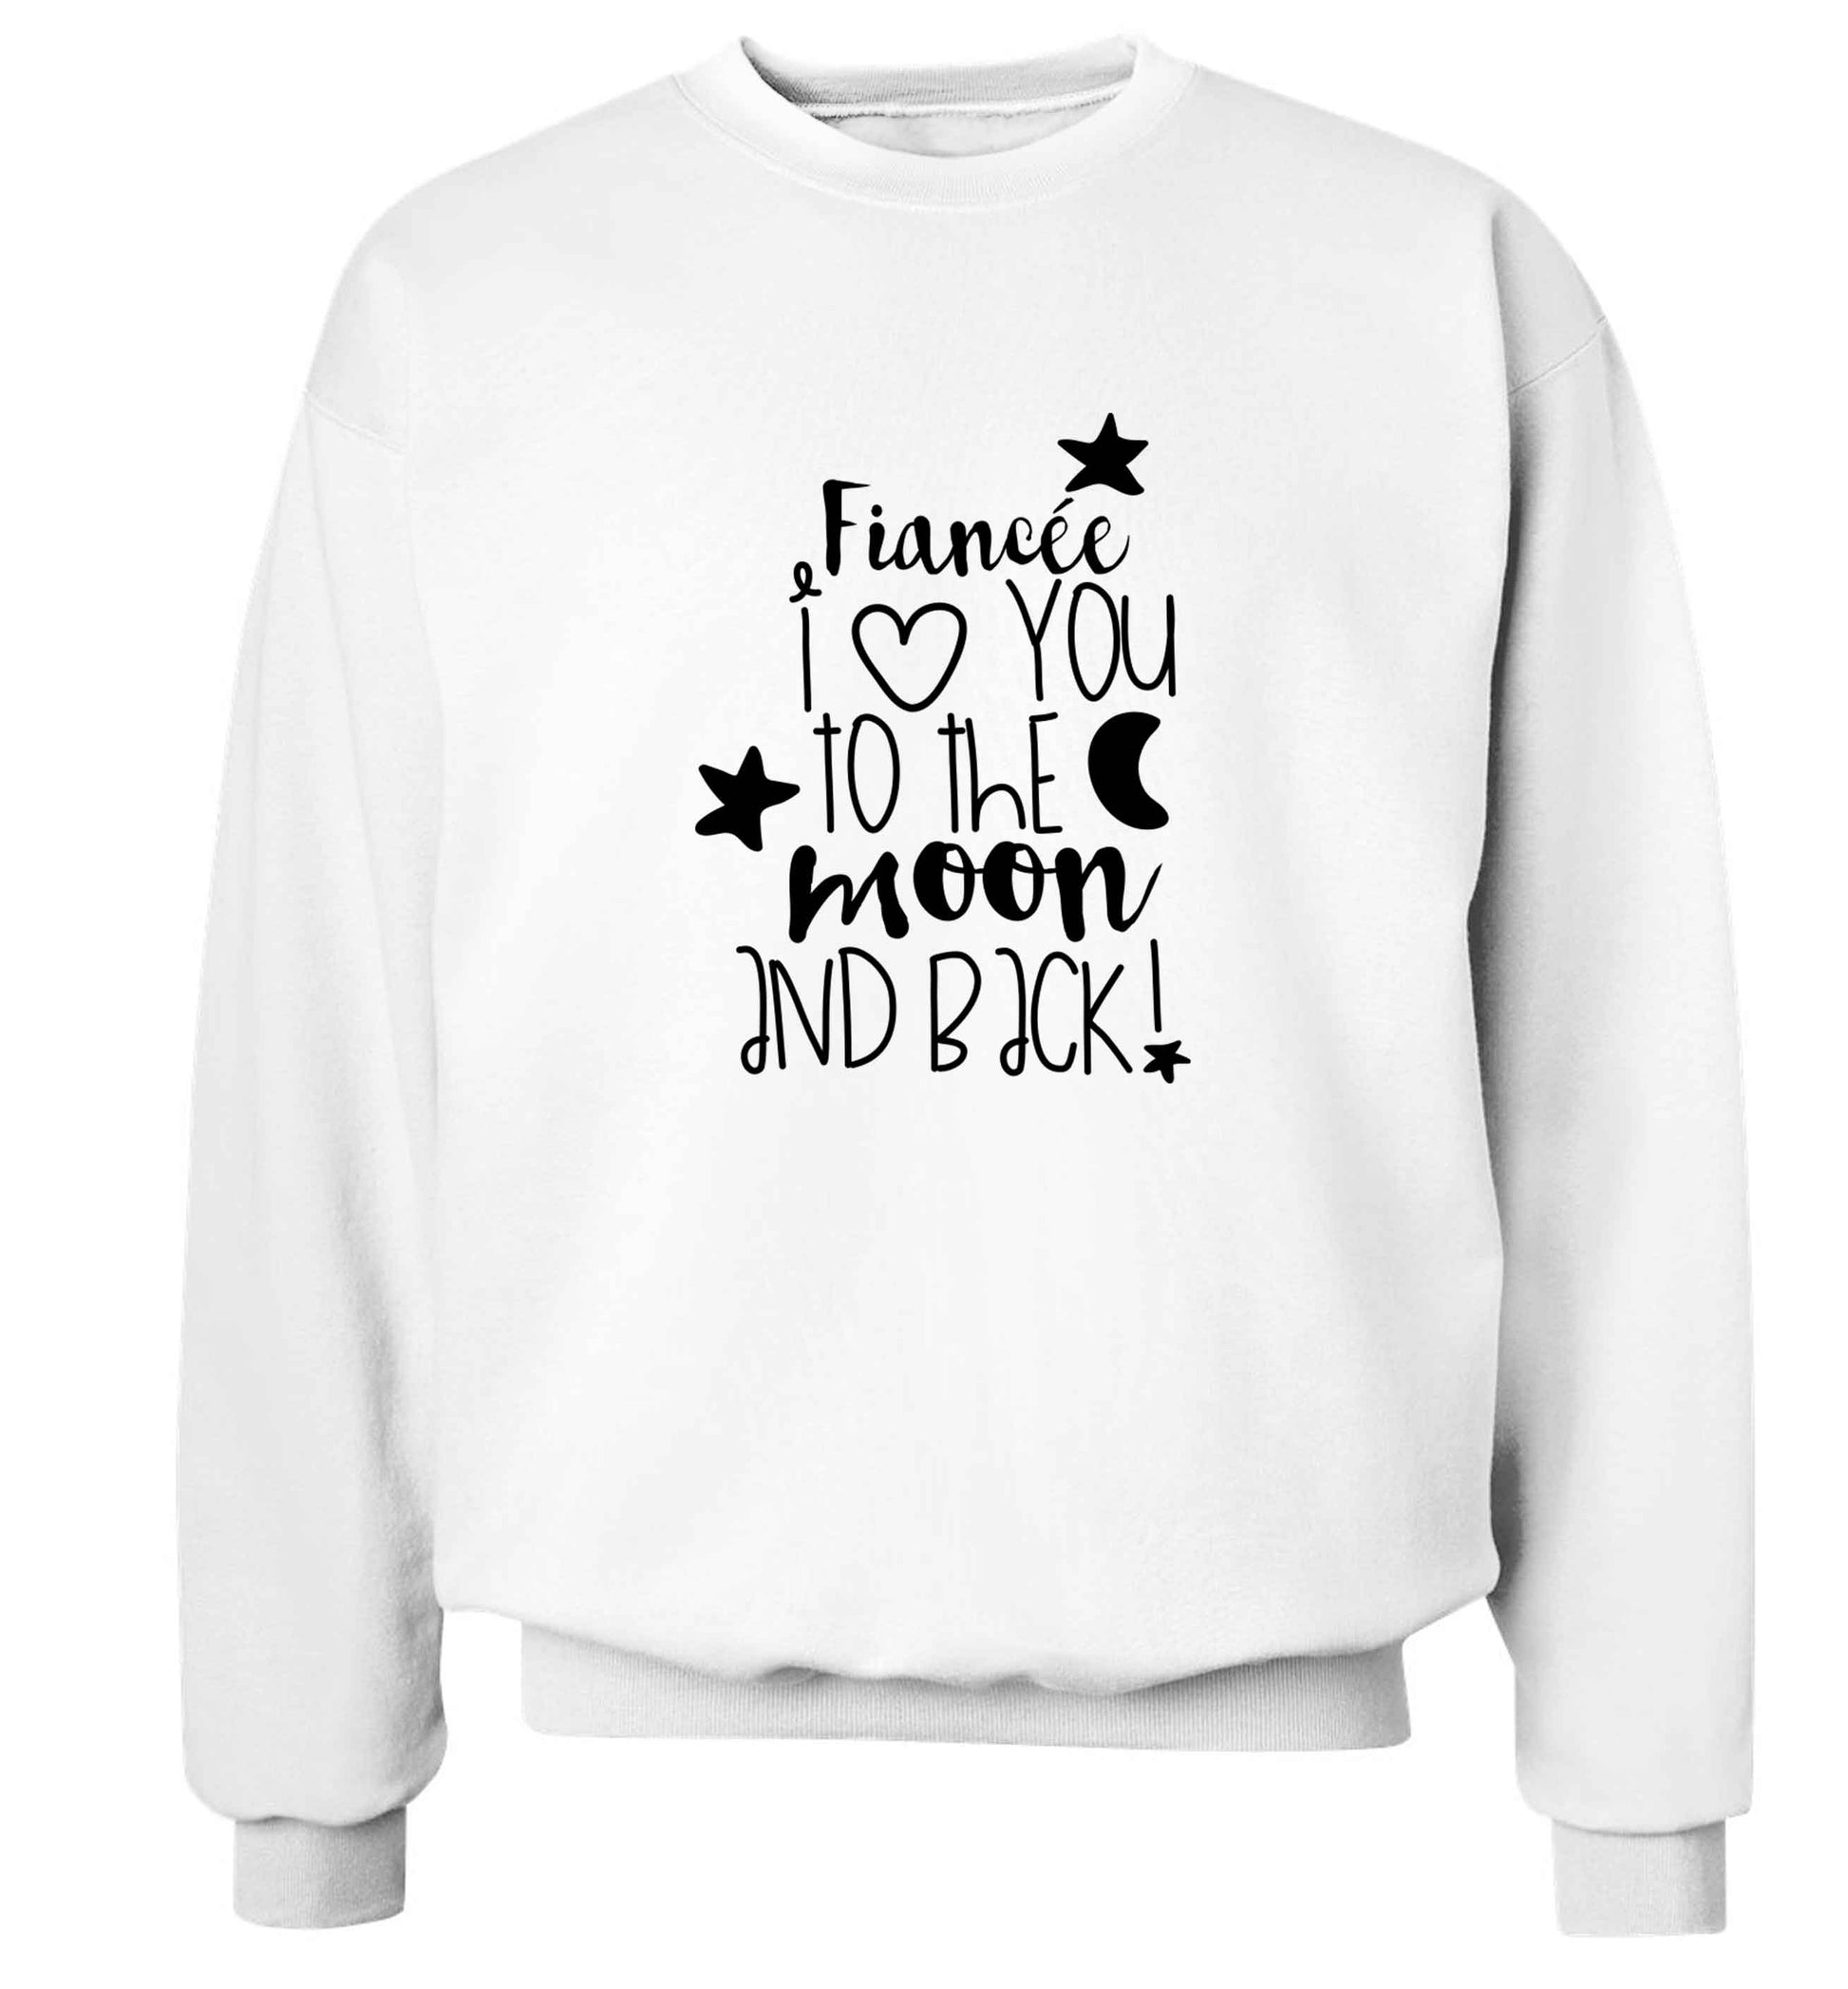 Fiancée I love you to the moon and back adult's unisex white sweater 2XL